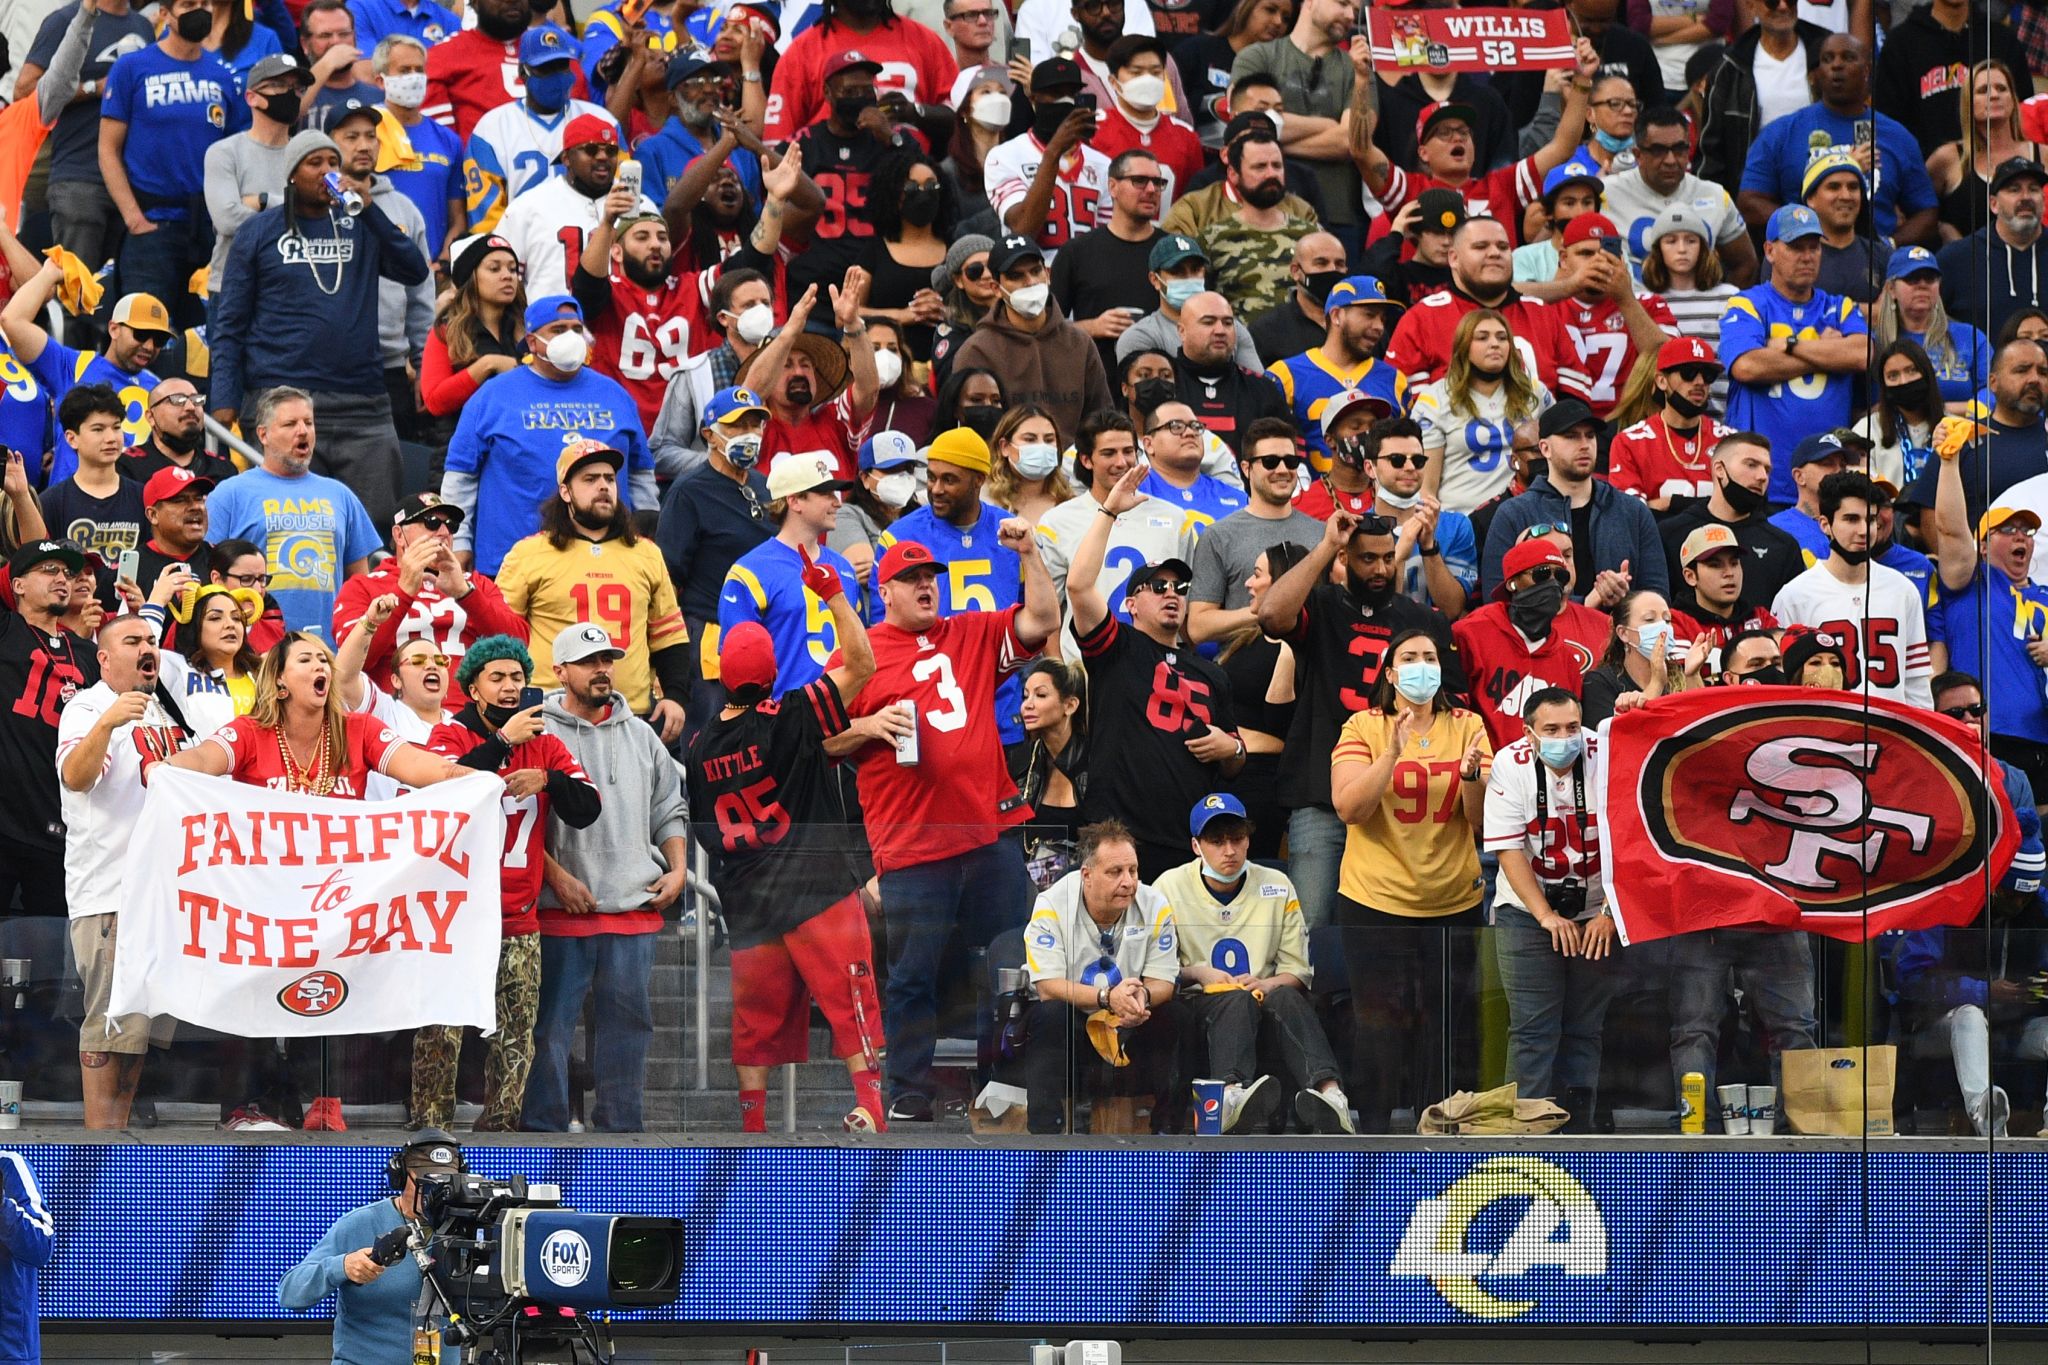 Ticket sales for Rams home game favoring 49ers fans